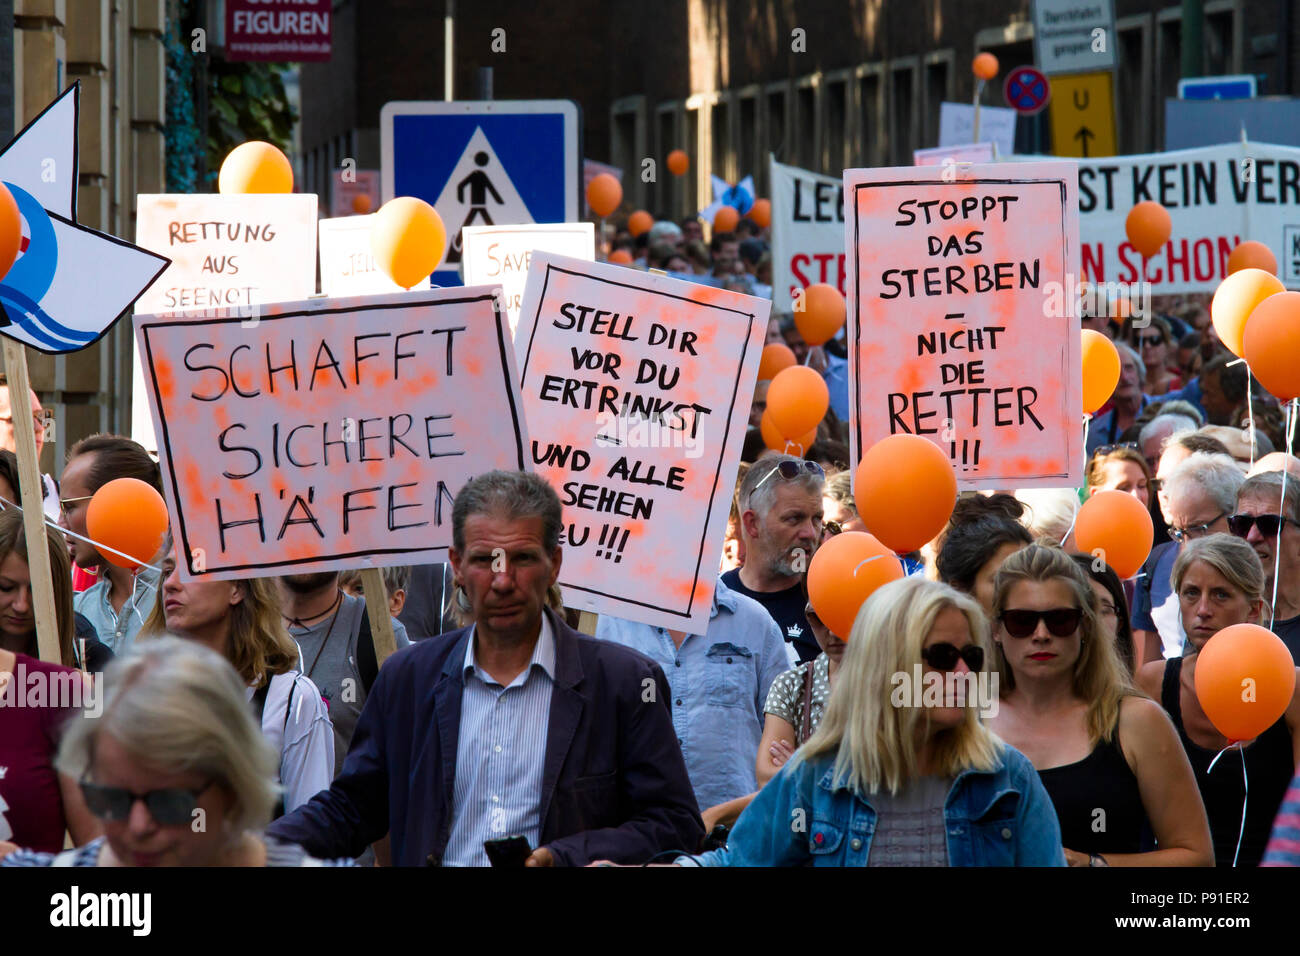 Cologne, Germany, 13 July 2018. Several thousand people demonstrate on July 13, 2018 in Cologne for the rescue of refugees from the Mediterranean Sea. Under the motto 'Stop dying in the Mediterranean', a coalition of initiatives, political groups and private individuals wants to send a signal for humanity. Cologne, Germany.   Credit: Joern Sackermann/Alamy Live News Stock Photo